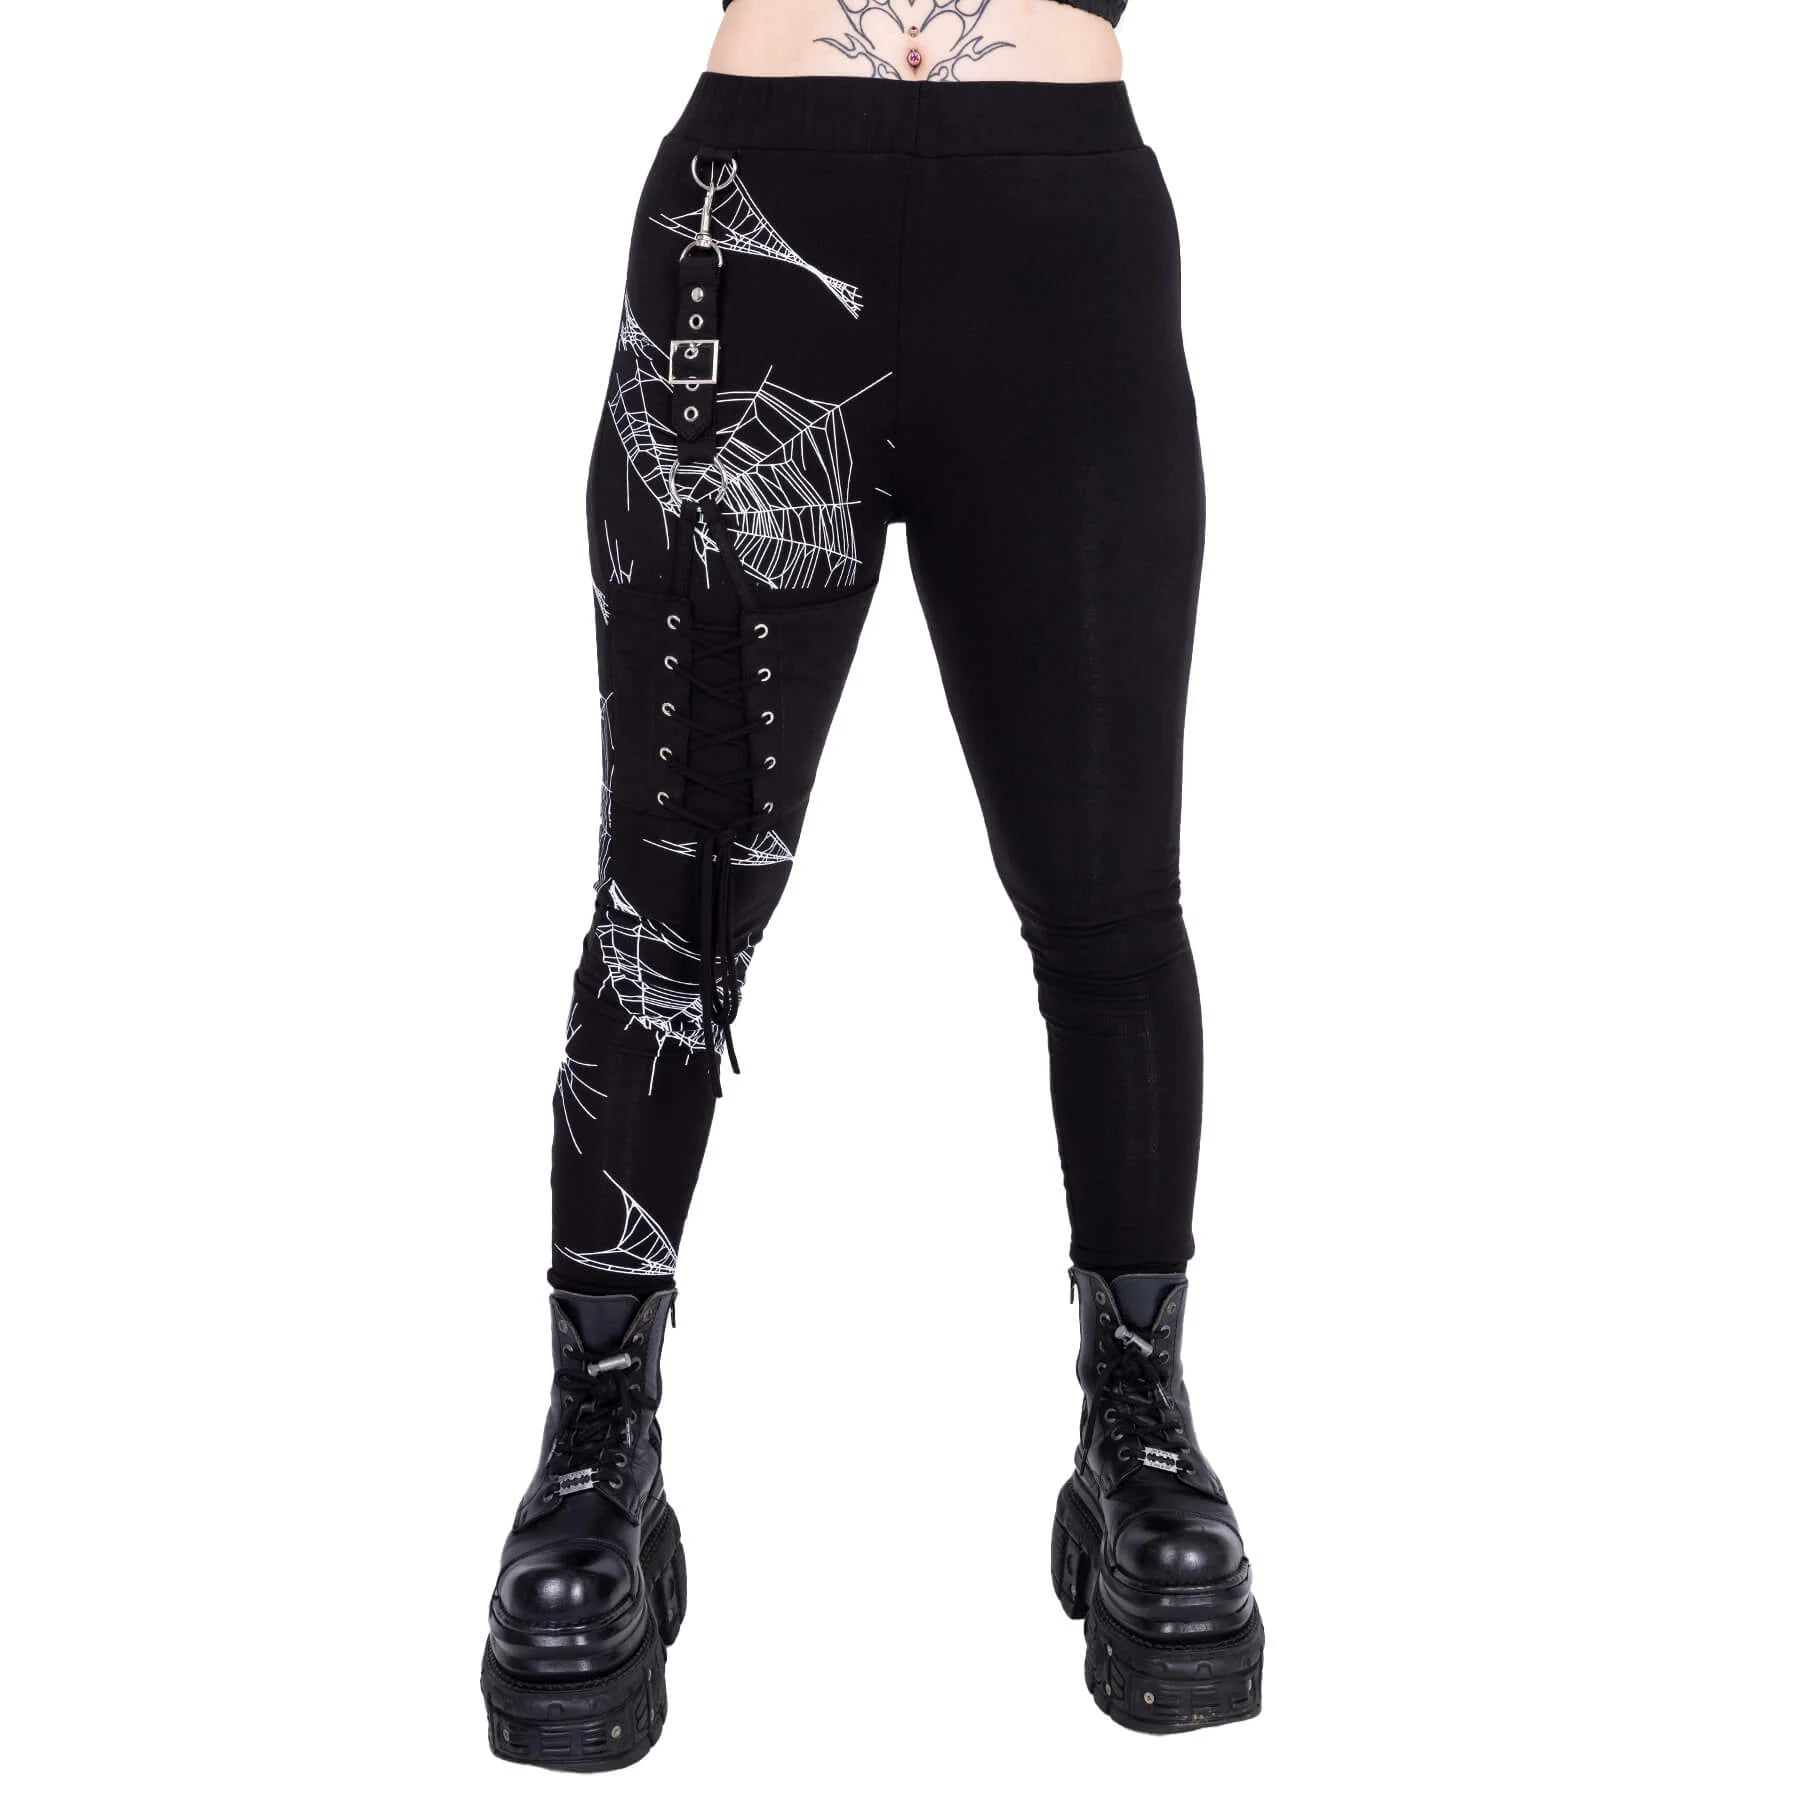 Heartless Arhana Spiderweb Leggings with Lace Up Feature - Kate's Clothing